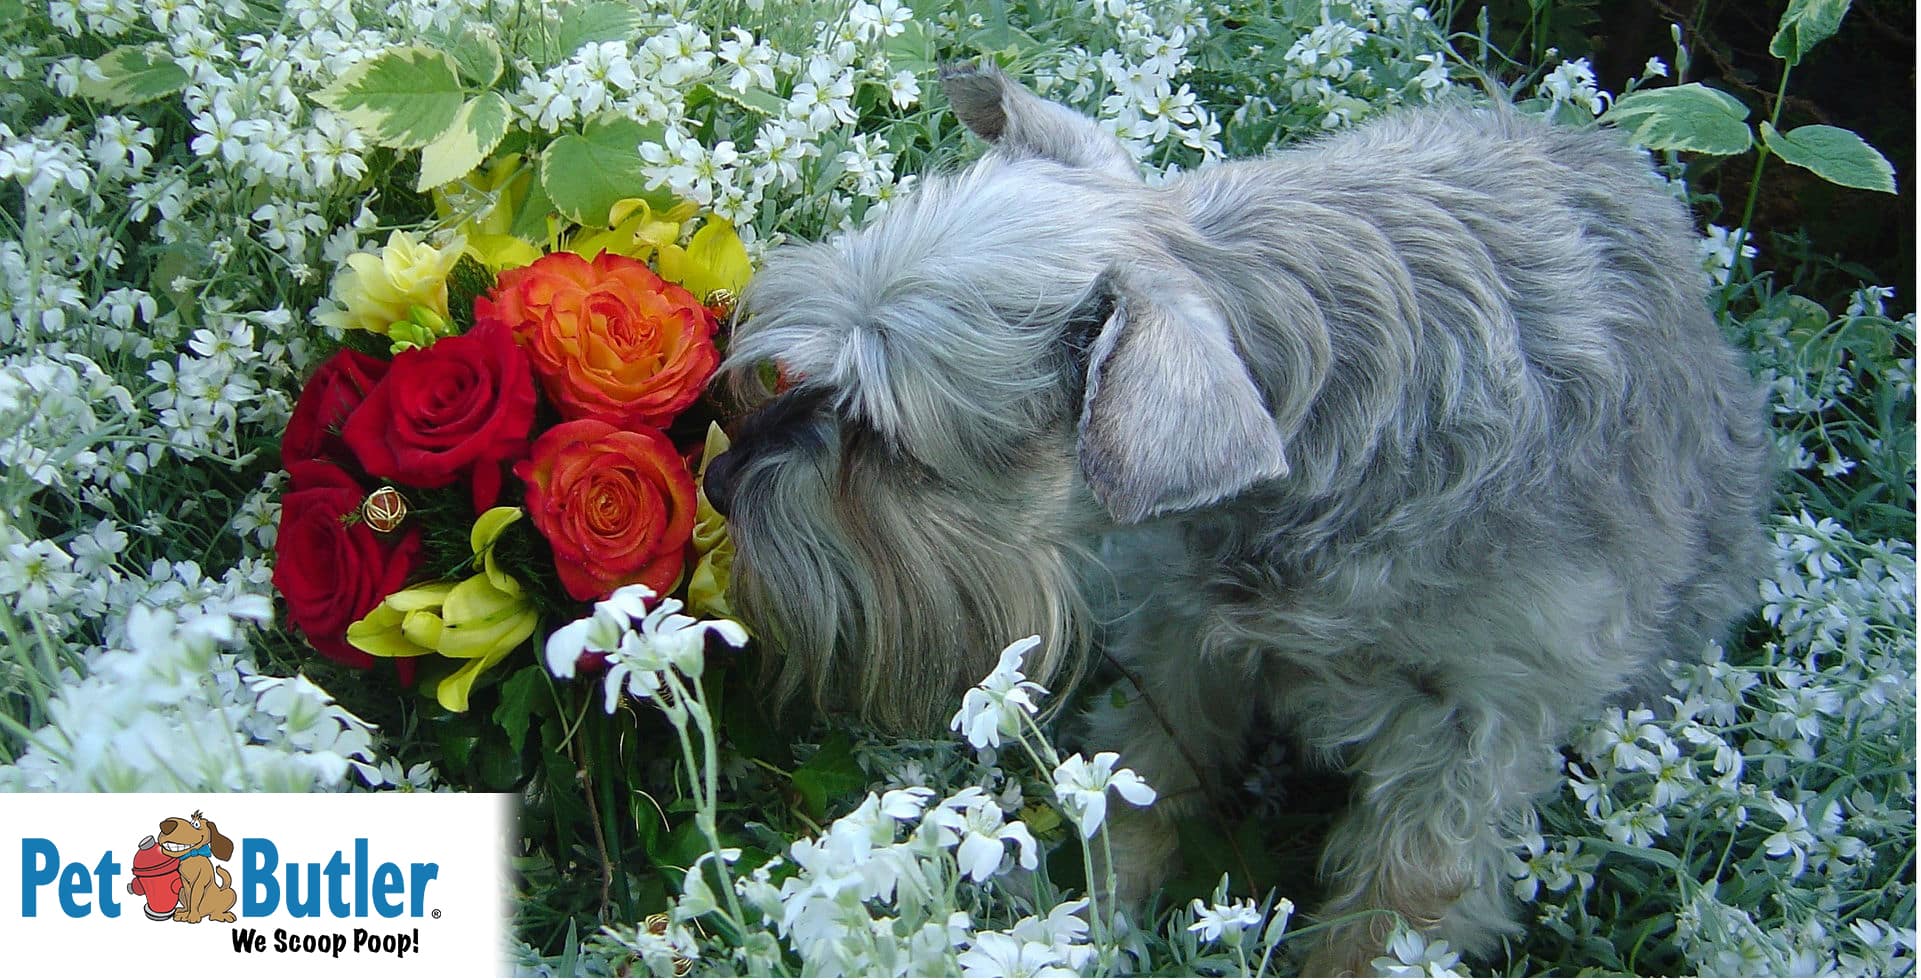 Plants Poisonous to Dogs: 10 Plants Toxic to Pups